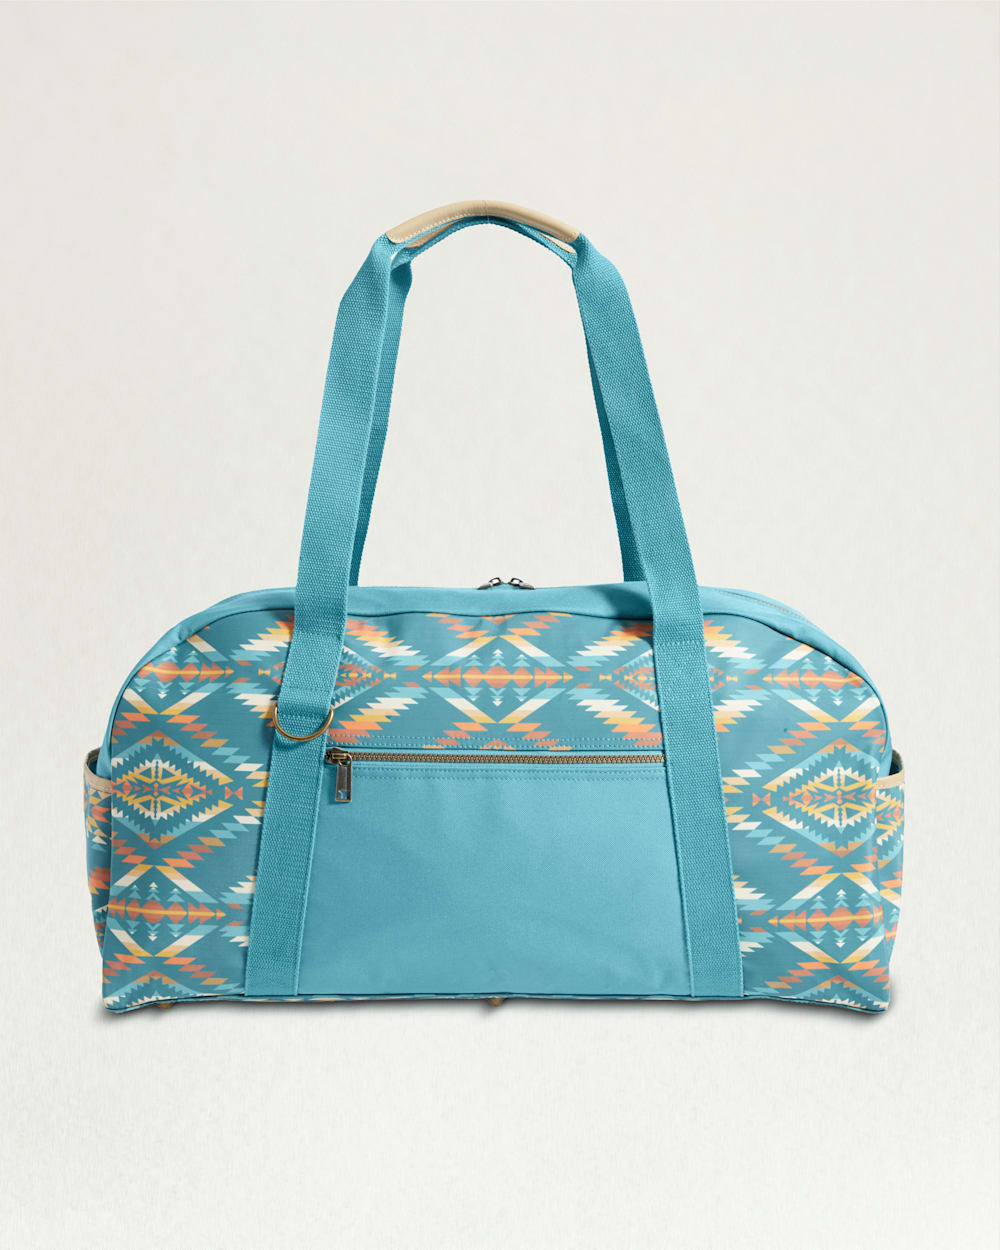 SUMMERLAND BRIGHT CANOPY CANVAS WEEKENDER IN TURQUOISE image number 1